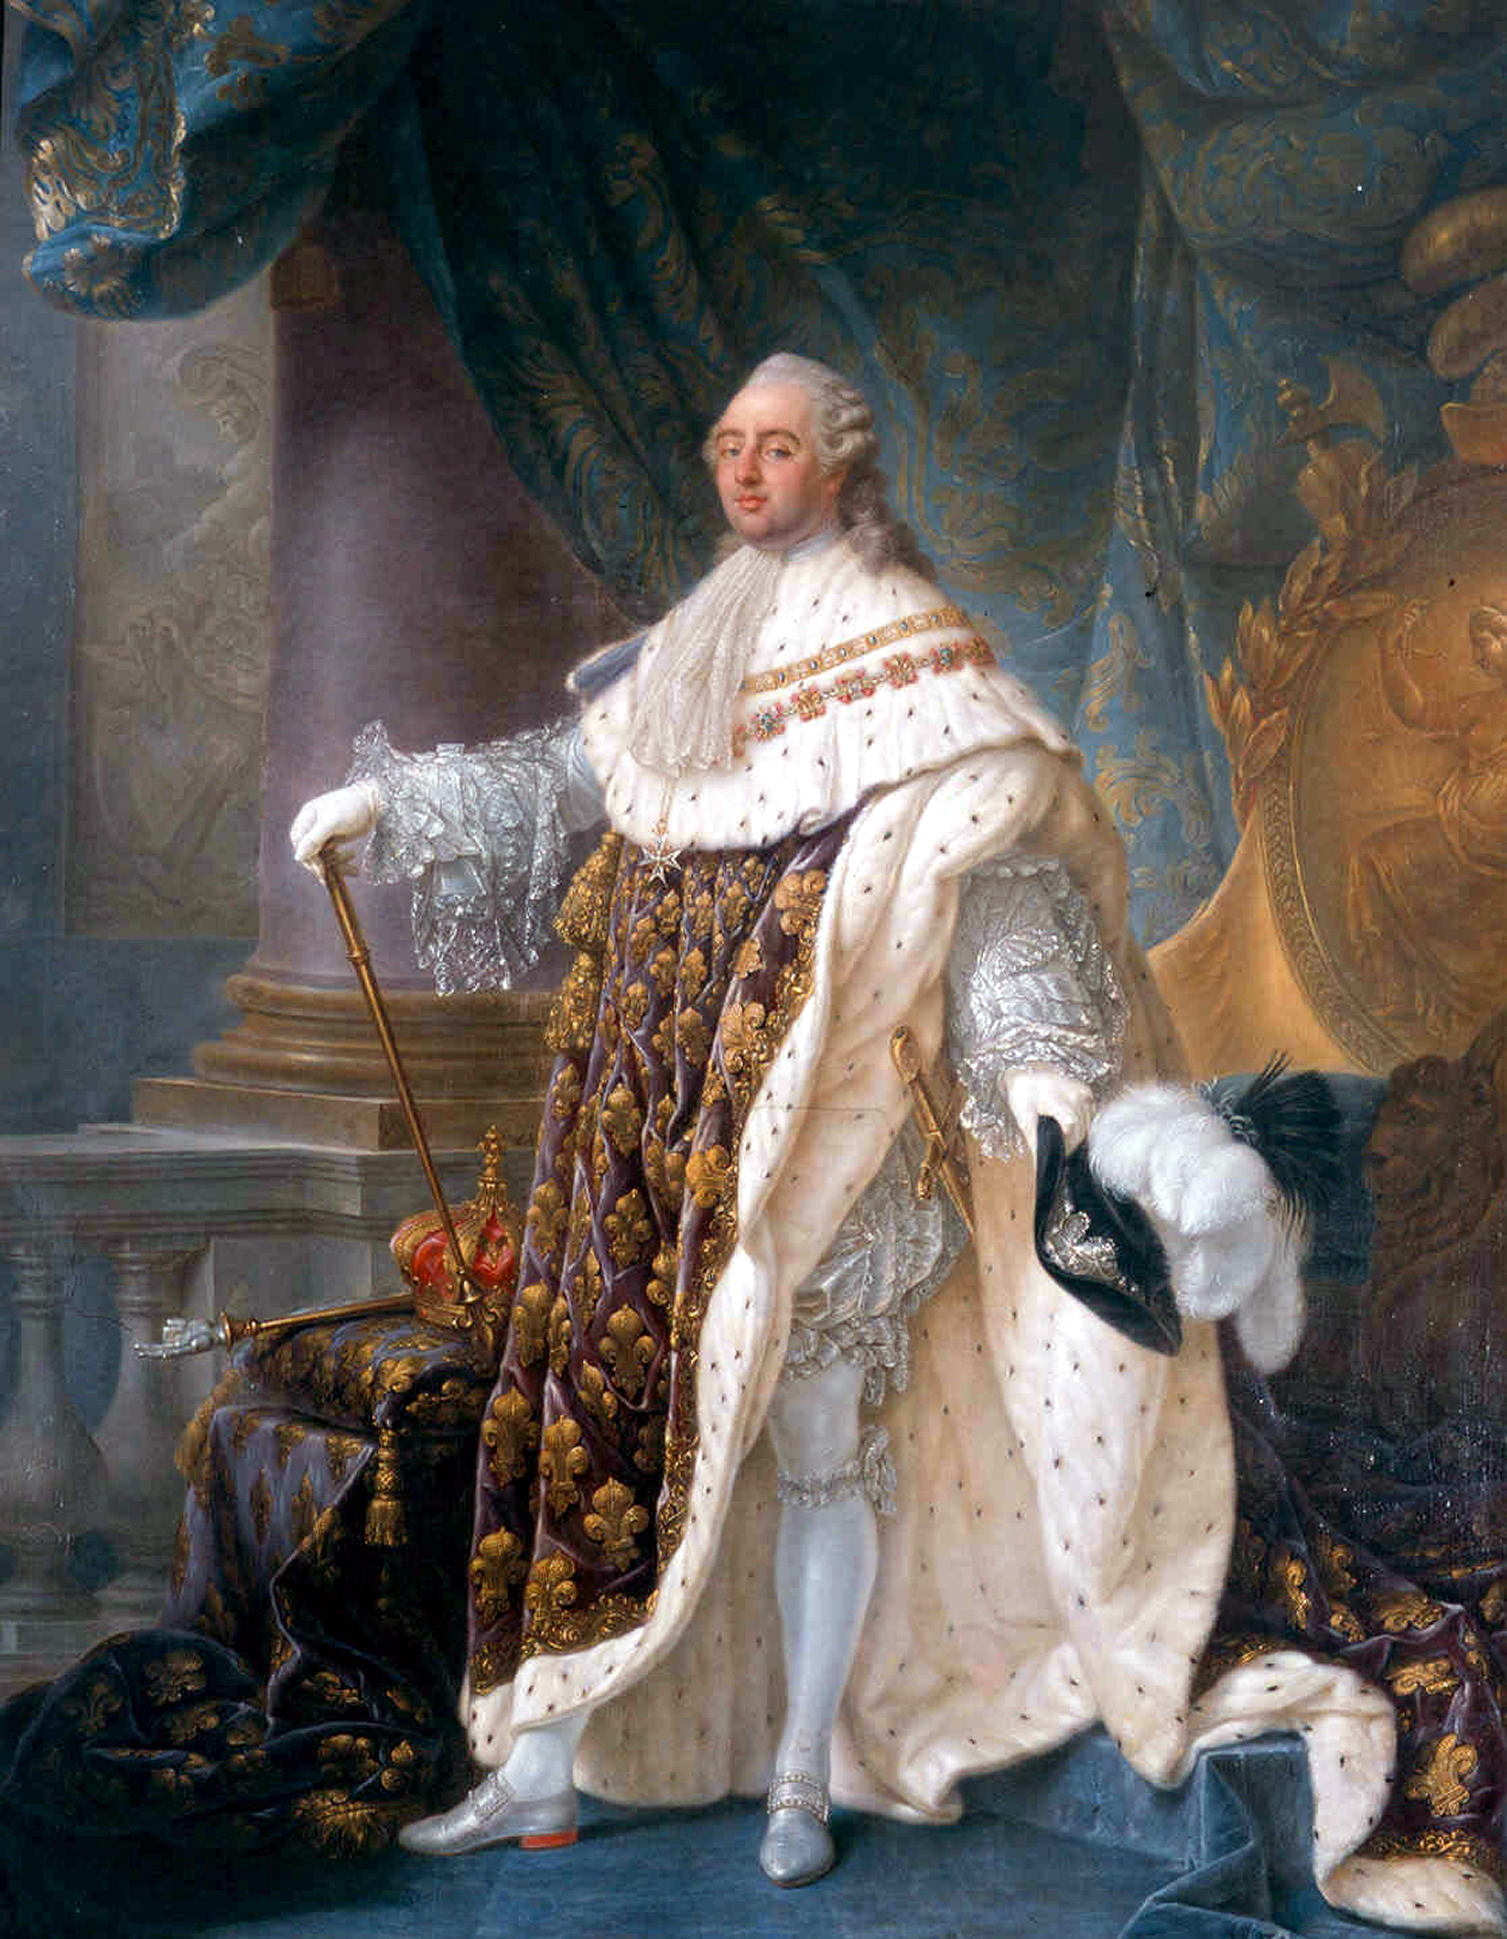 Joseph Siffred Duplessis (1725-1802) - Louis XVI, King of France